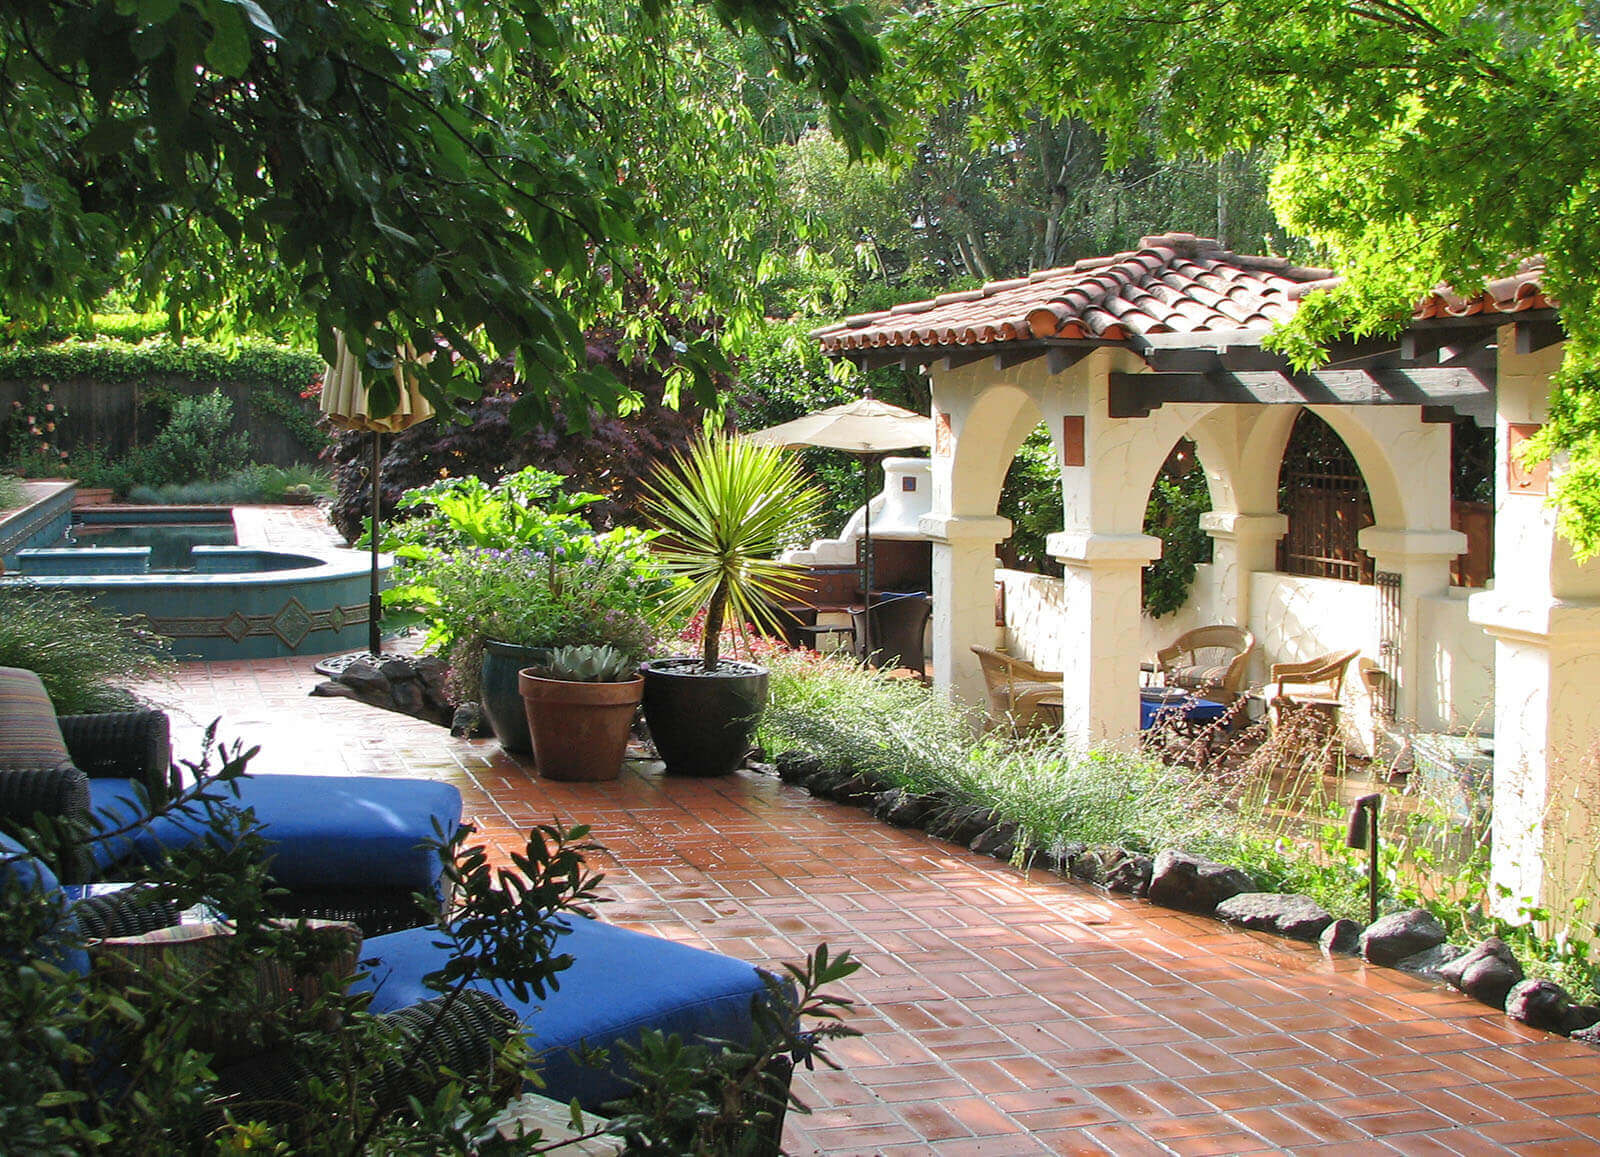 Pretty white plaster Spanish style arches and mission tile roofed seating areas with outdoor furniture in a brick tile patio and staged garden areas shrouded with trees